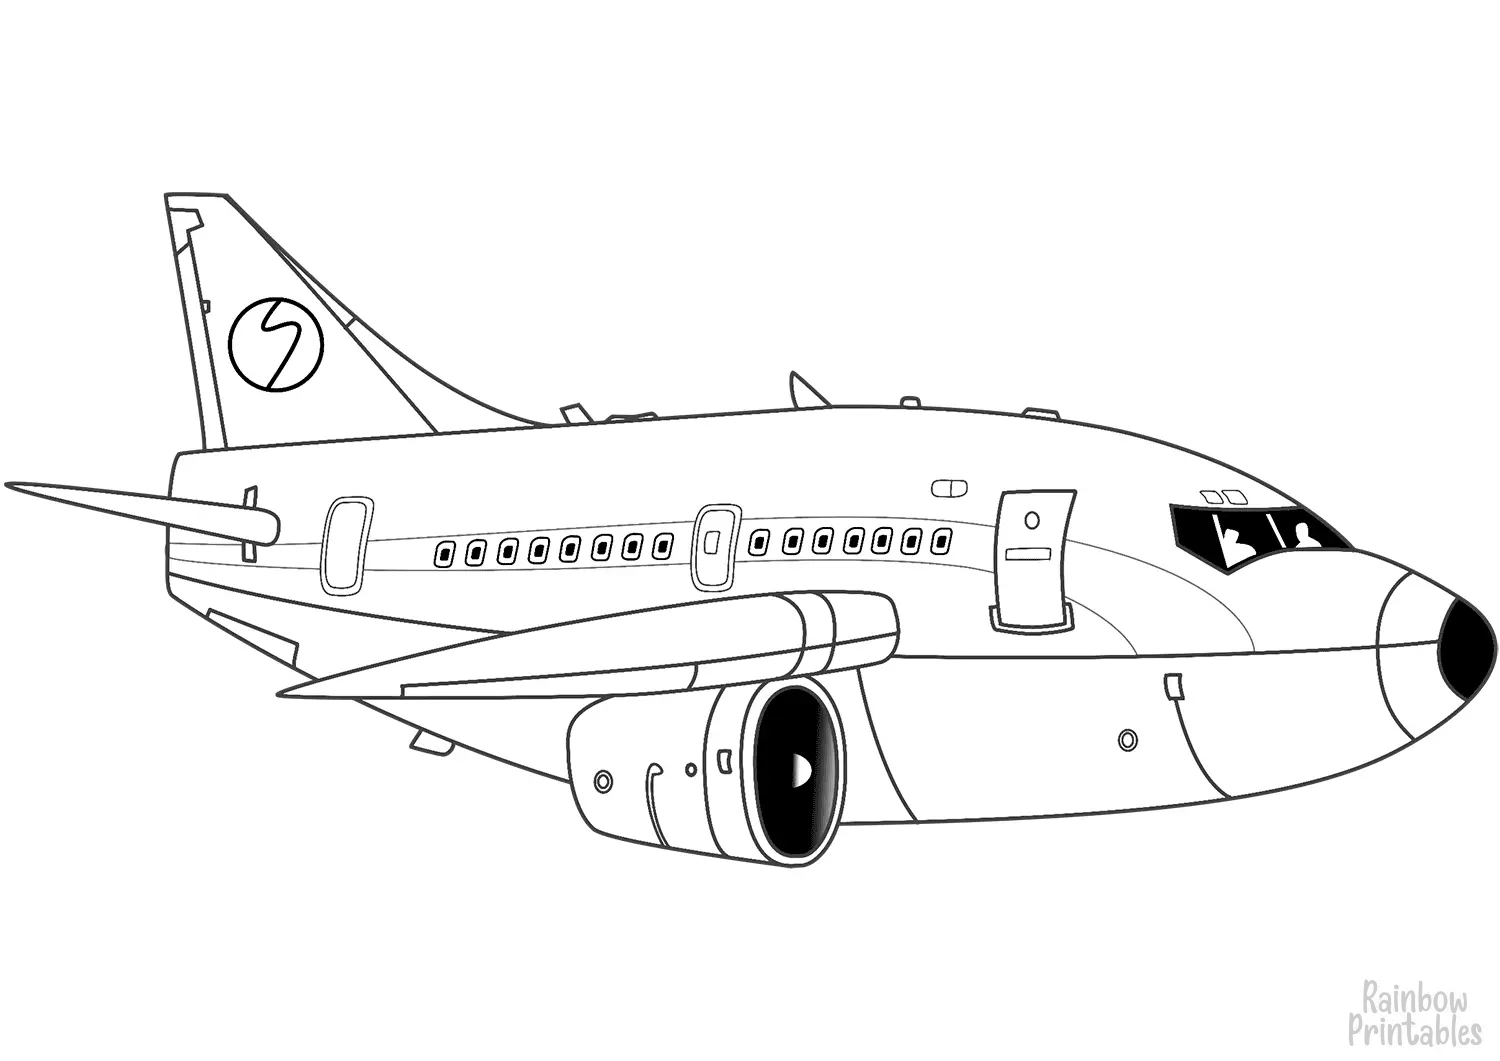 CARTOON AIRLINER AEROSPACE Clipart Coloring Pages for Kids Adults Art Activities Line Art